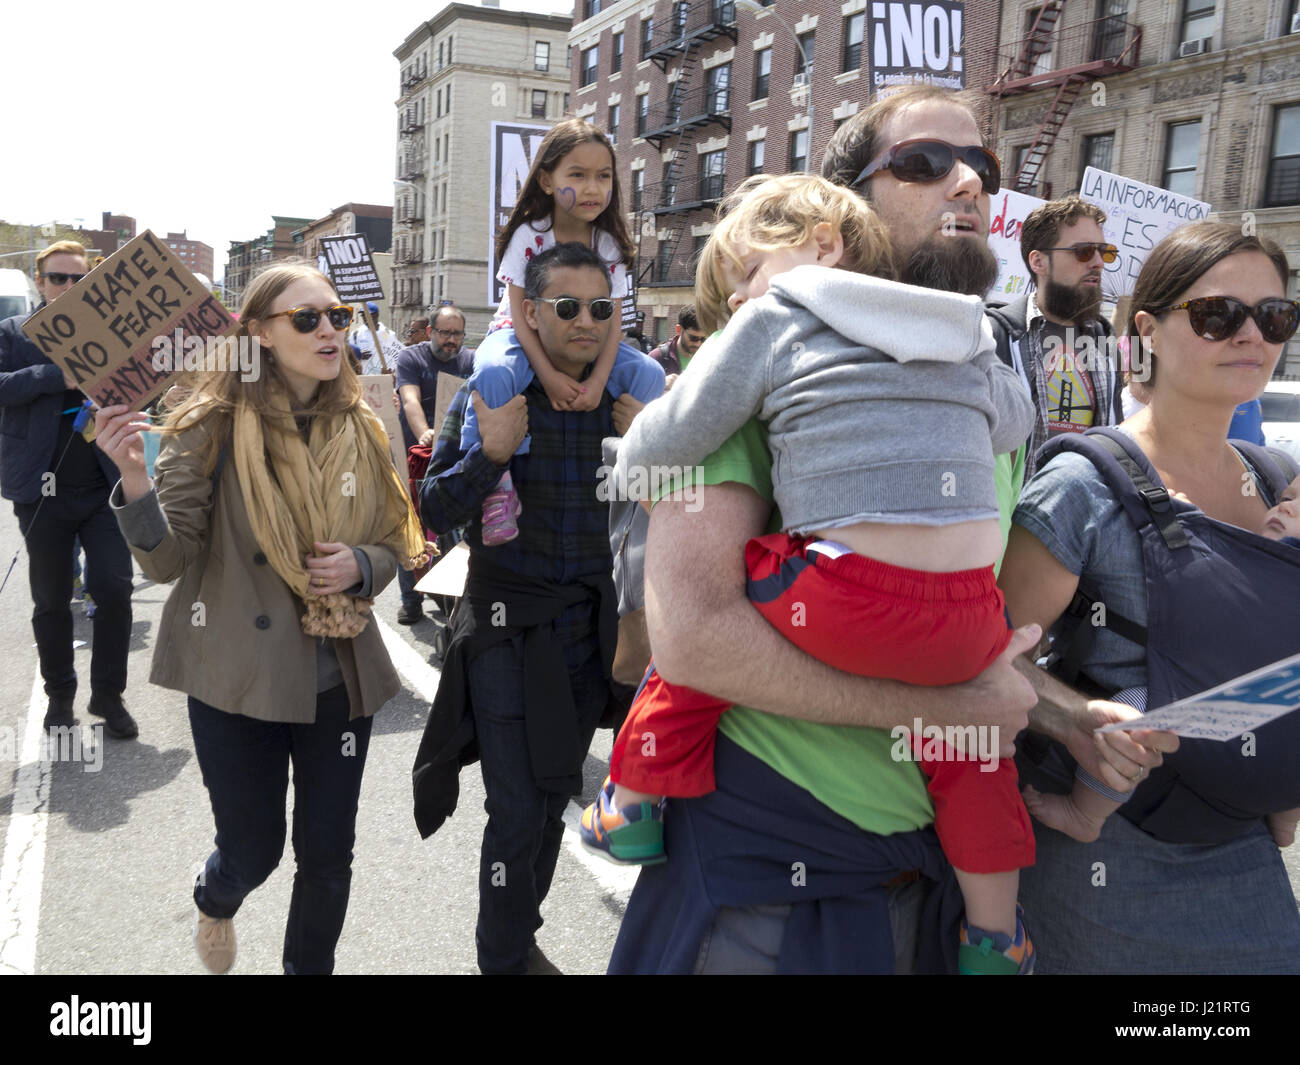 New York City NY, USA. 23rd Apr, 2017. Hundreds of protesters gathered in Harlem to rally and march from W.145th St. to Inwood in The Uptown March for Immigrants. Protesters demanded an end to detention and deportations, collaboration between ICE and local police, the separation of families, the Muslim ban, the wall, and the criminalization of immigrants. Credit: Ethel Wolvovitz/Alamy Live News Stock Photo